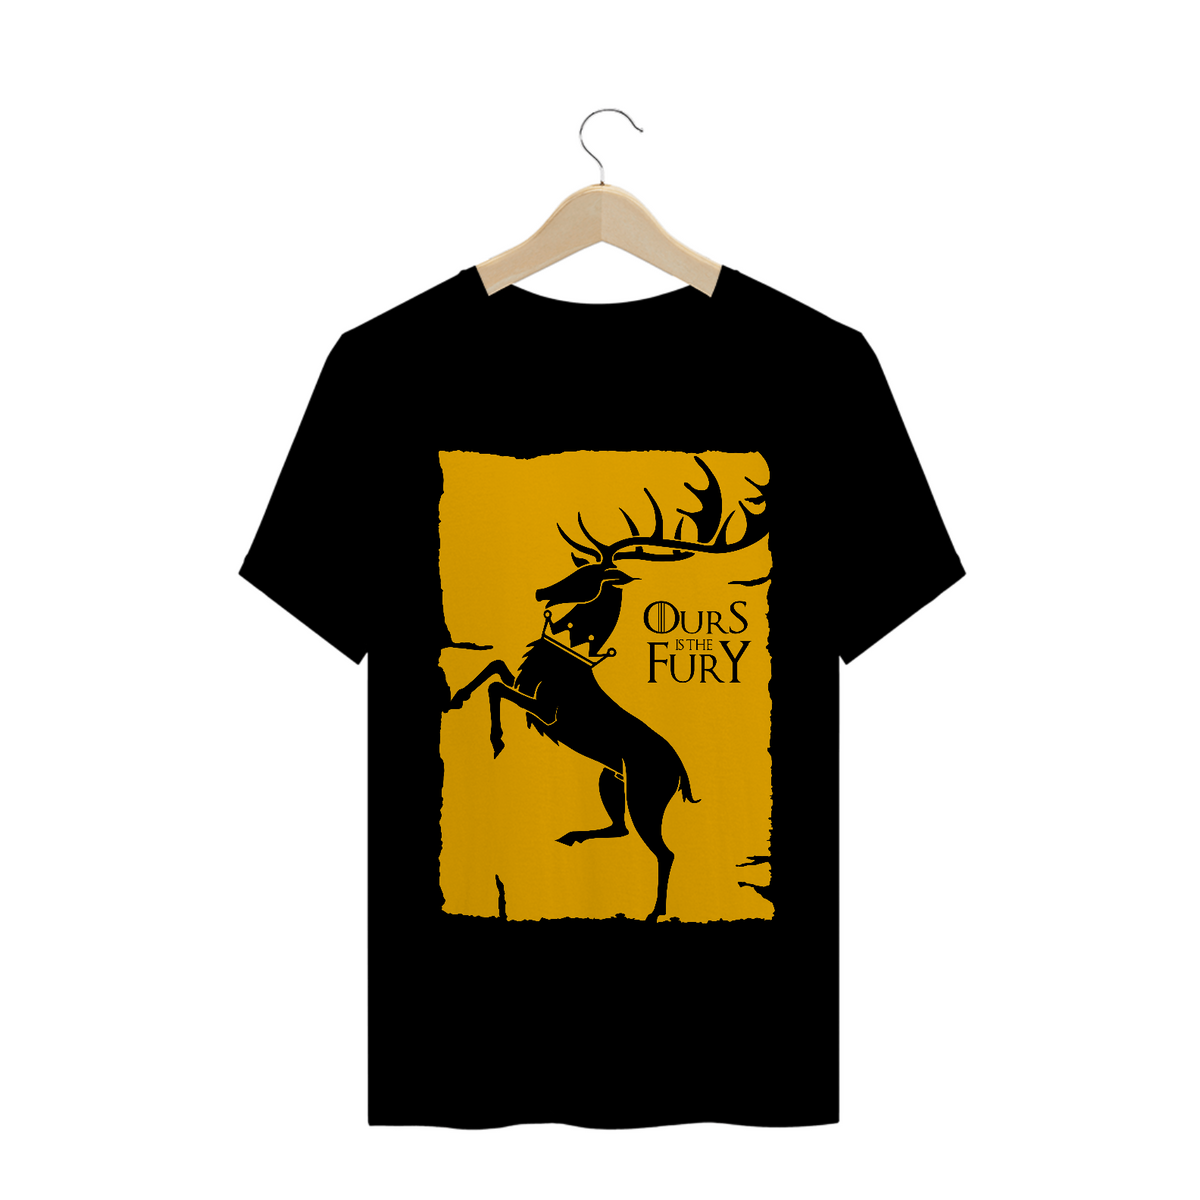 Nome do produto: Camiseta Game of Thrones Ours is The Fury